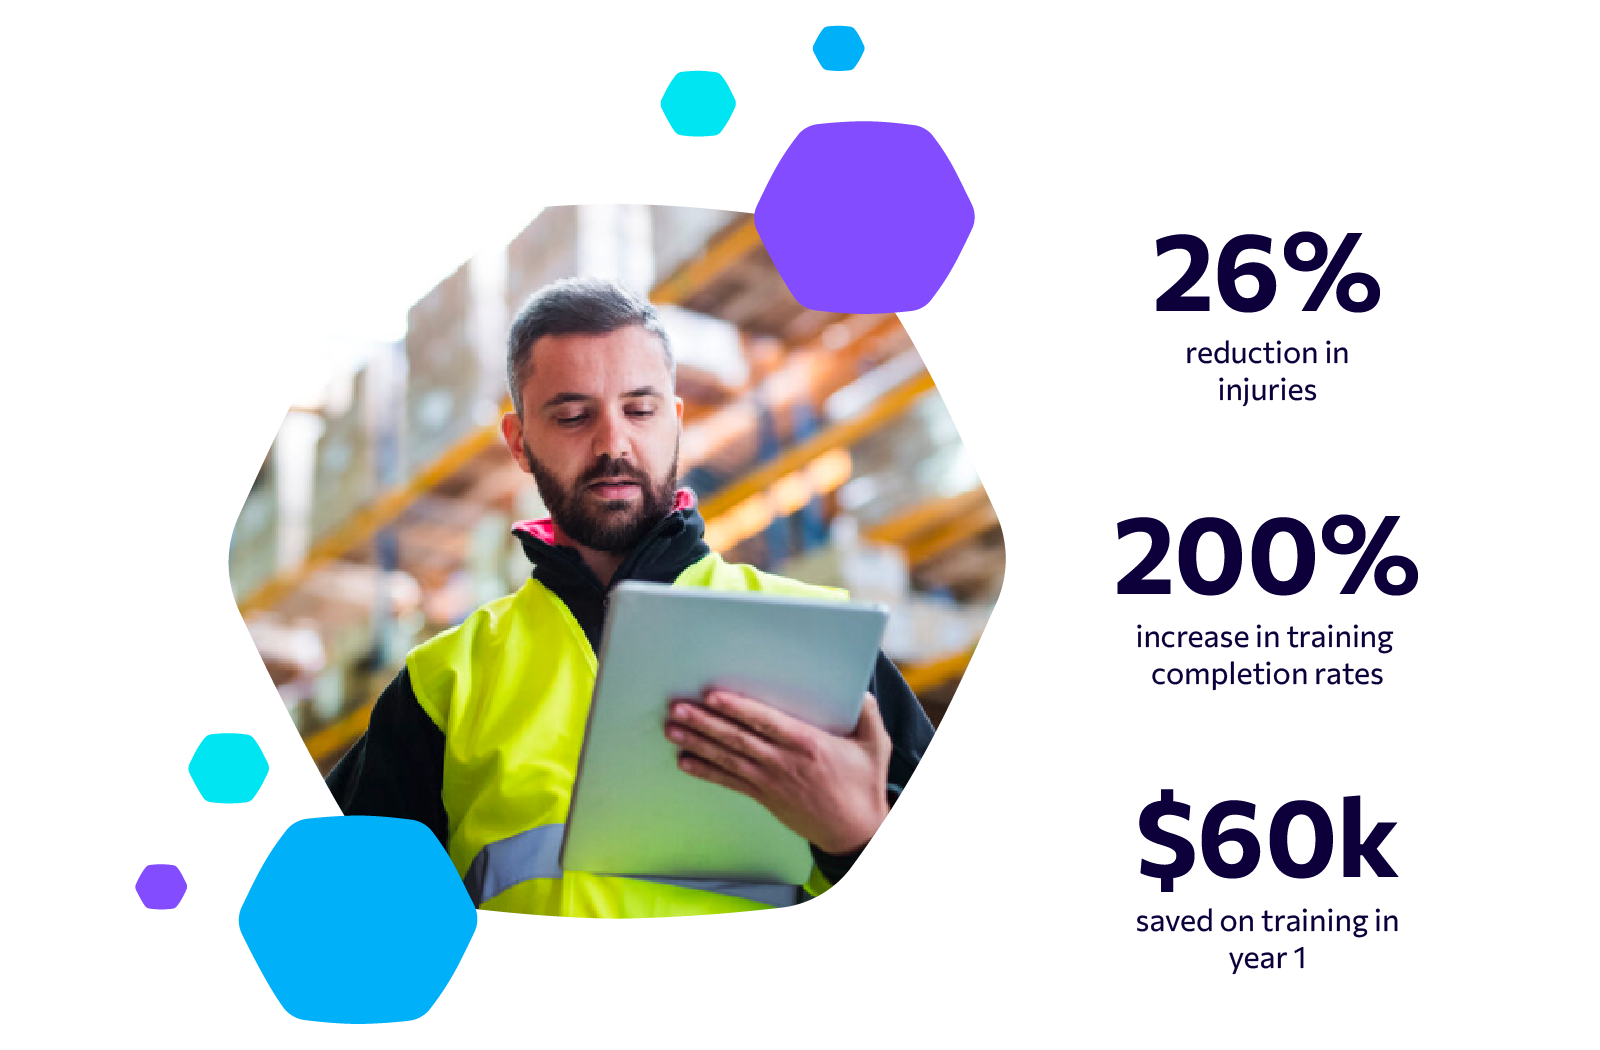 A leading North American Logistics company saw a 26% reduction in injuries, 200% increase in training completion rates and $60k saved on training in year 1